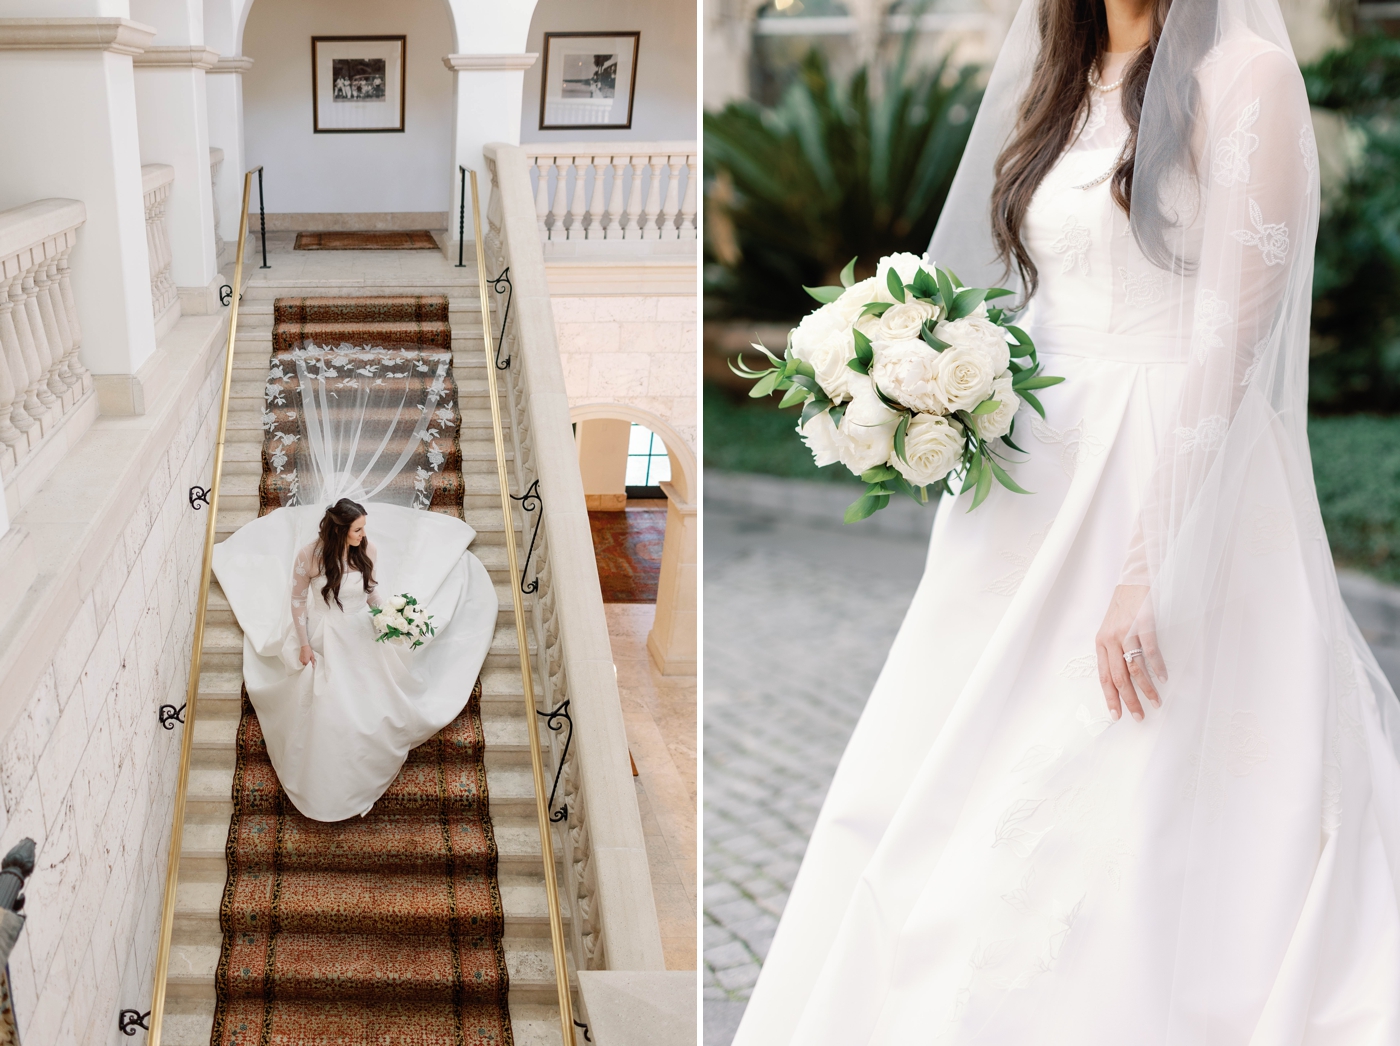 A wedding photographers favorite wedding trends for 2023